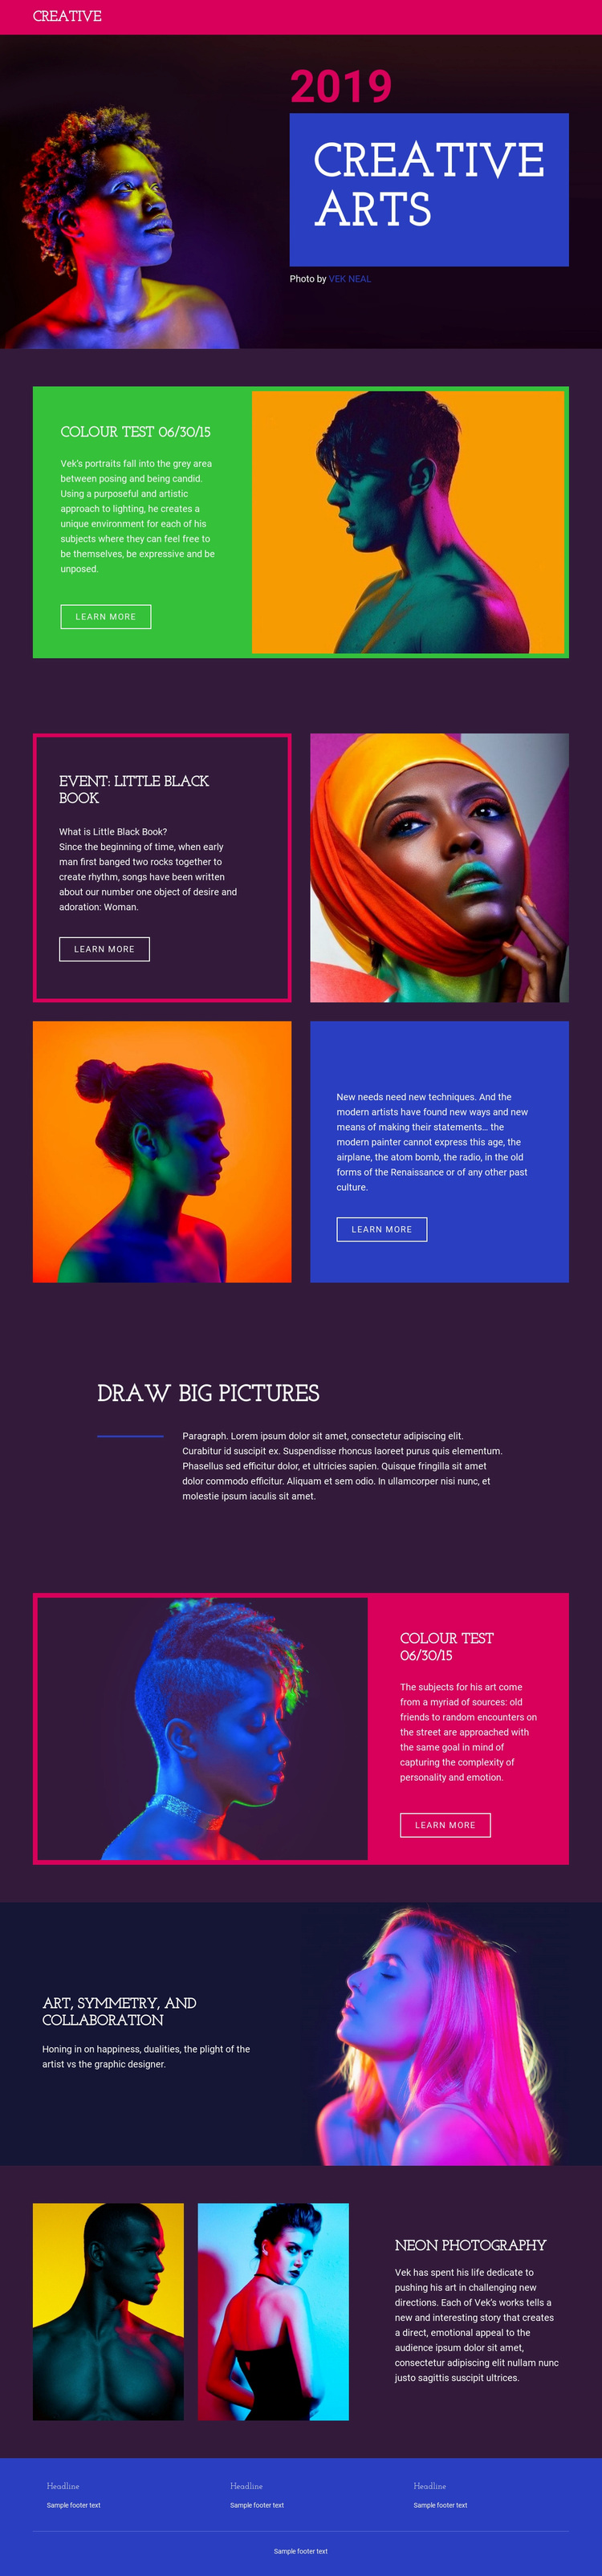 Limited-edition photography Website Design